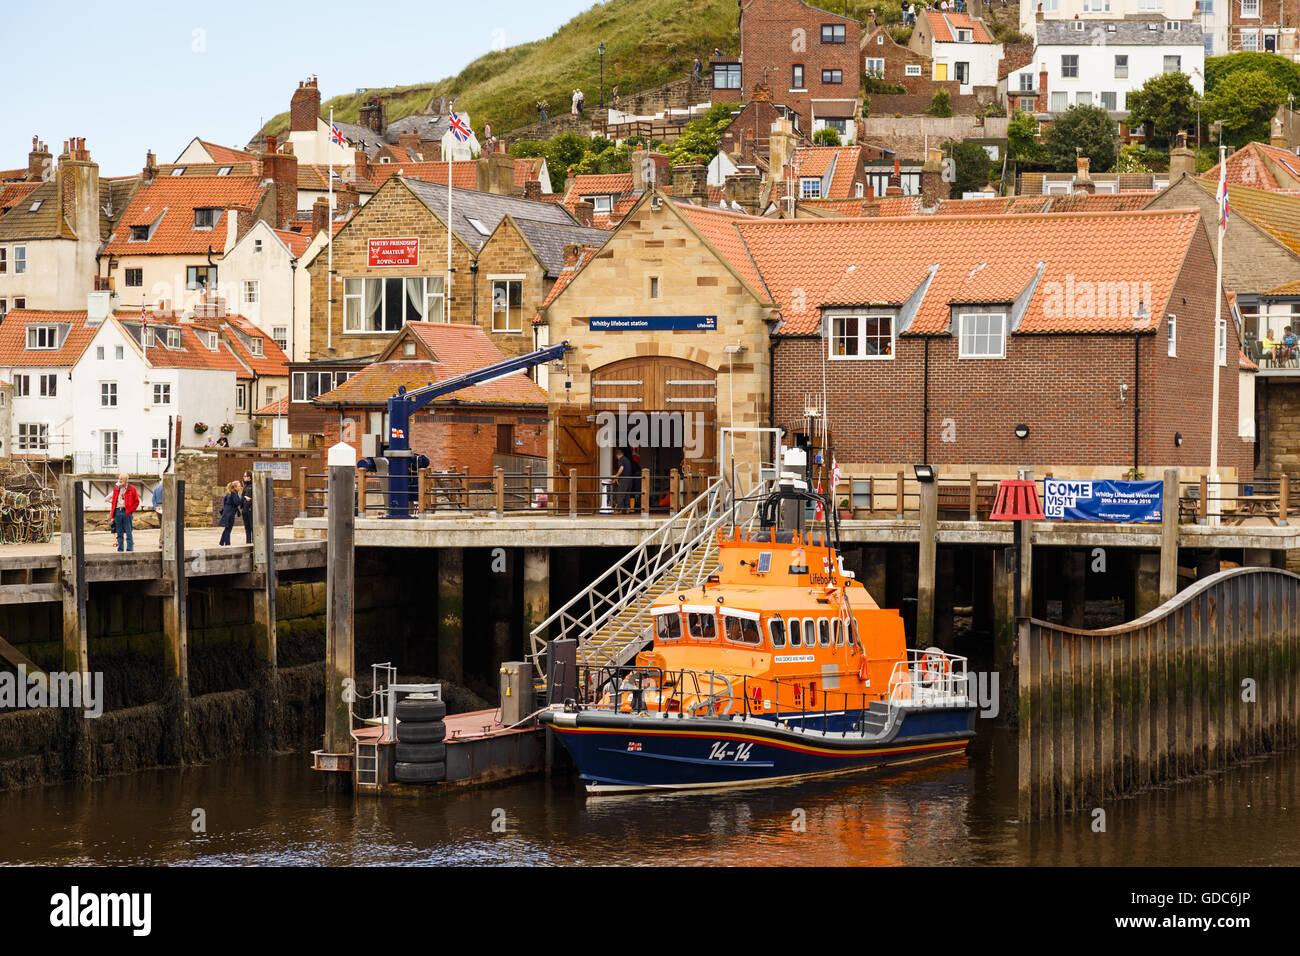 Lifeboat moored at Whitby Lifeboat Station. In Whitby, North Yorkshire, England. Stock Photo